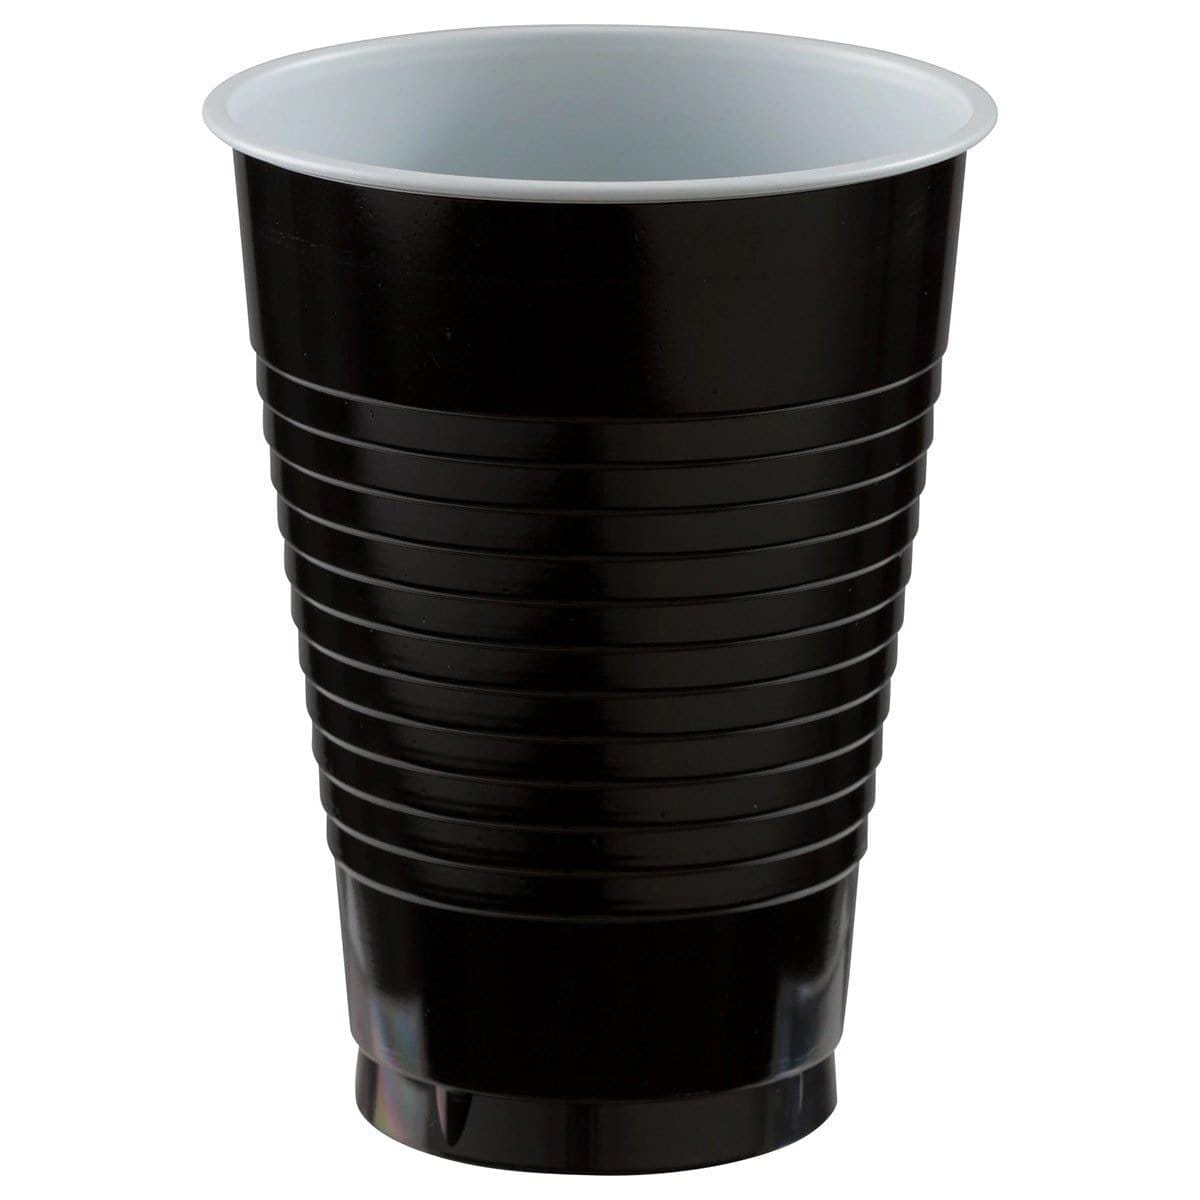 Buy plasticware Jet Black Plastic Cups, 12 oz., 20 Count sold at Party Expert